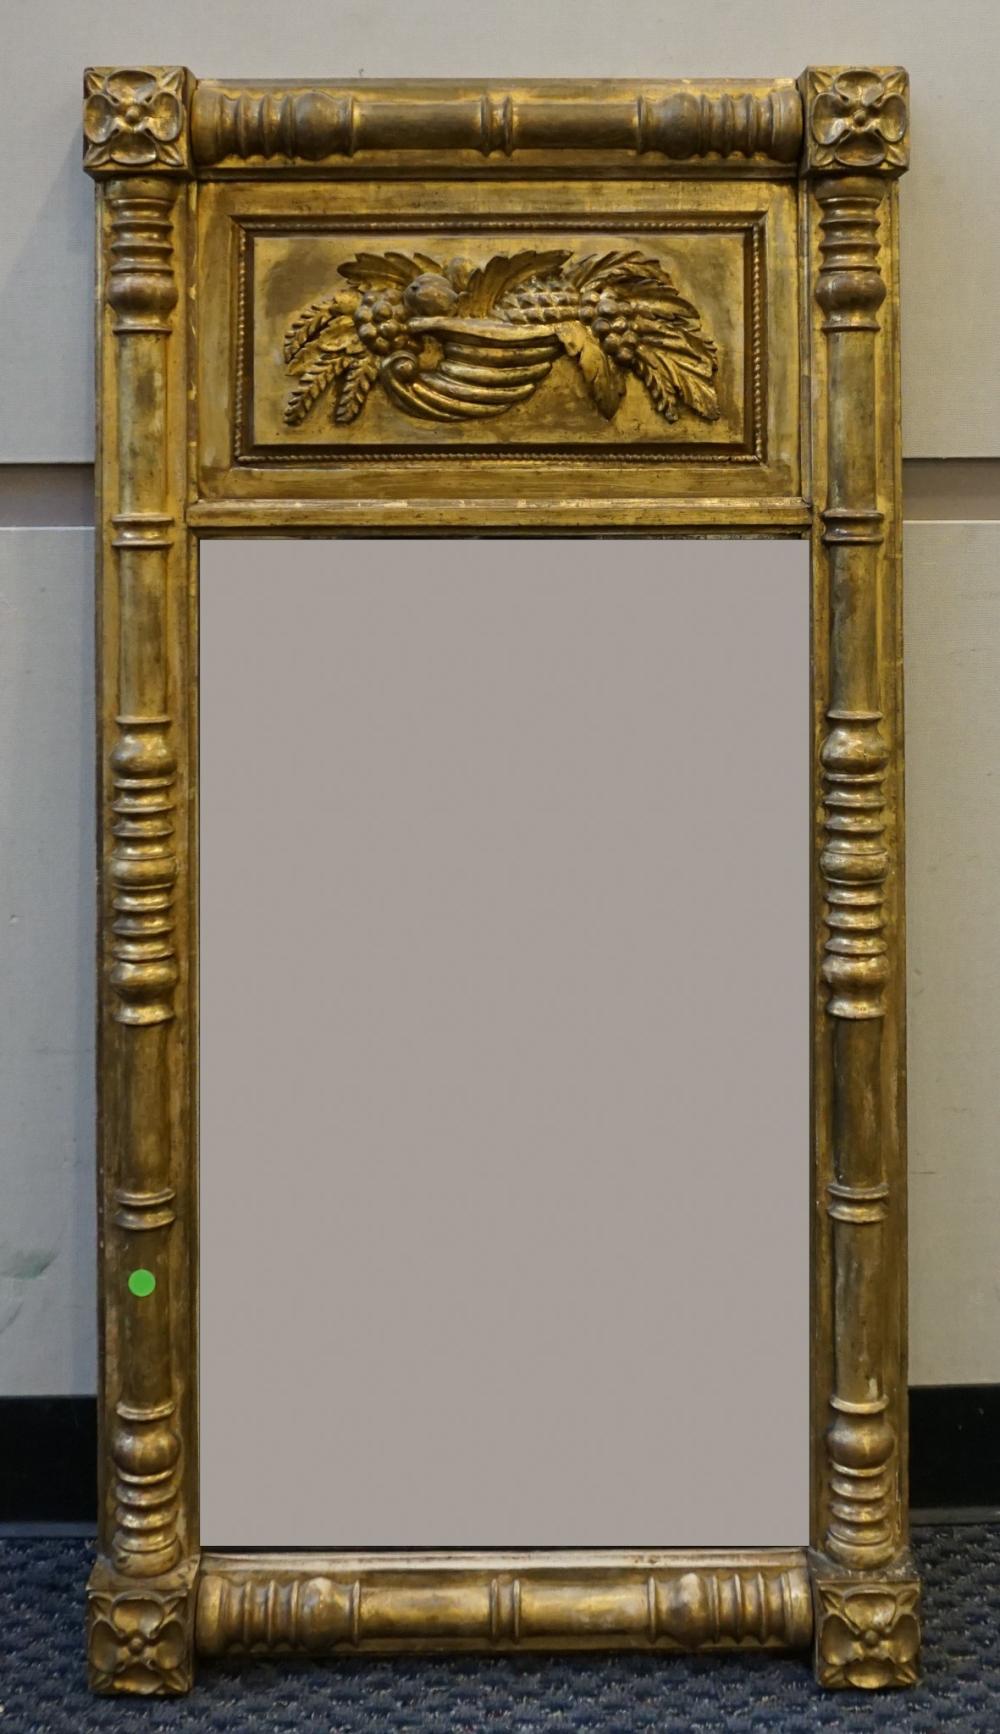 CLASSICAL STYLE PARCEL GILT DECORATED 33129d